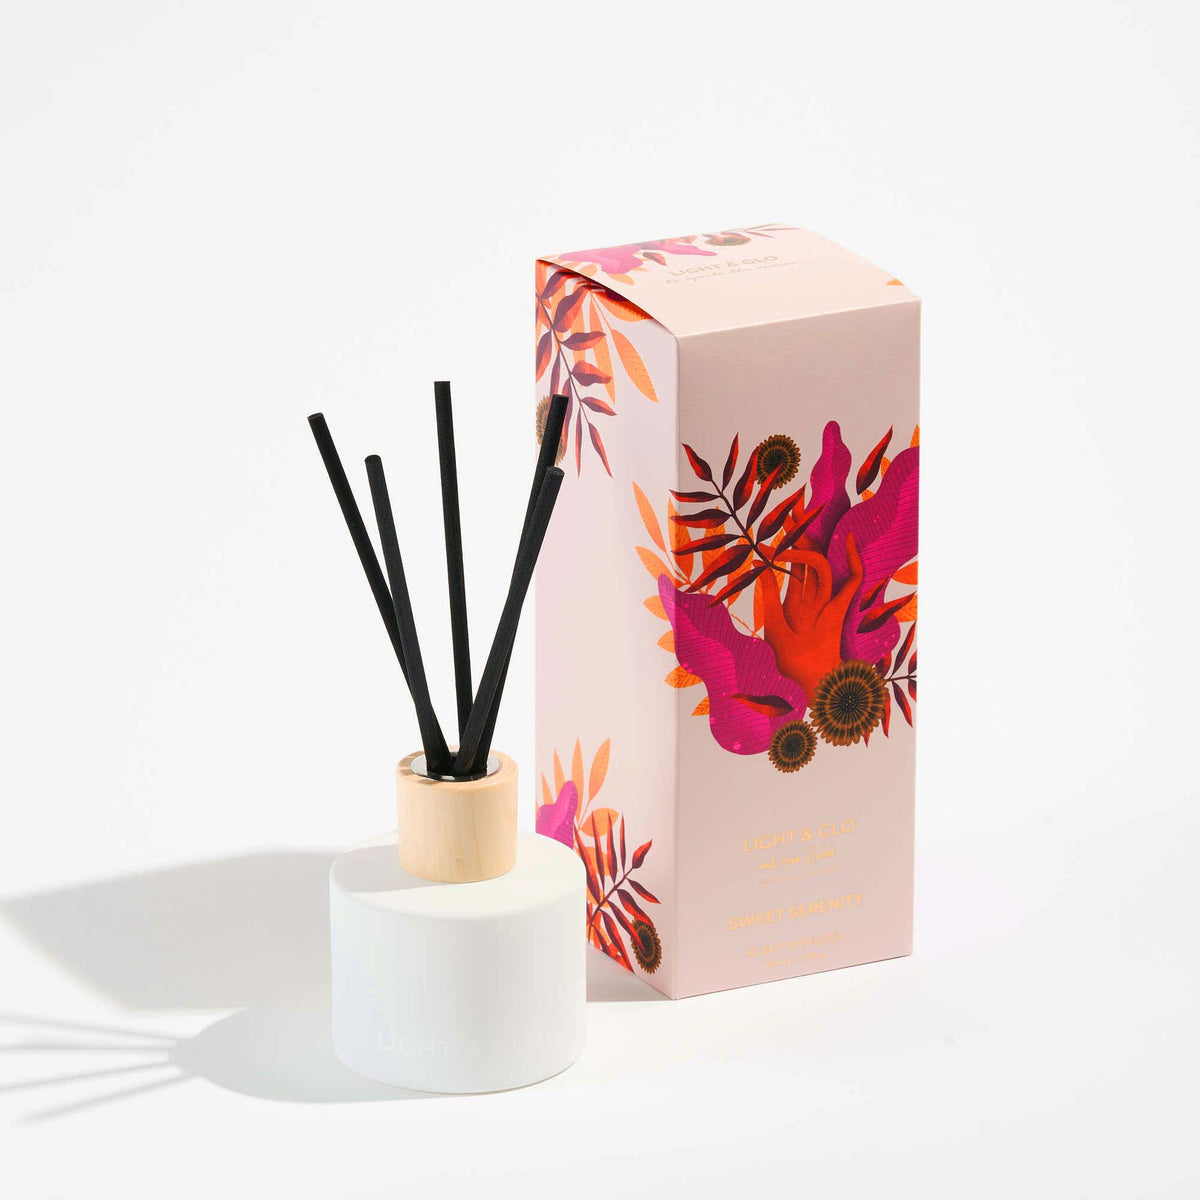 Artist Scent Diffuser - Sweet Serenity | Luxury Candles &amp; Home Fragrances by Light + Glo